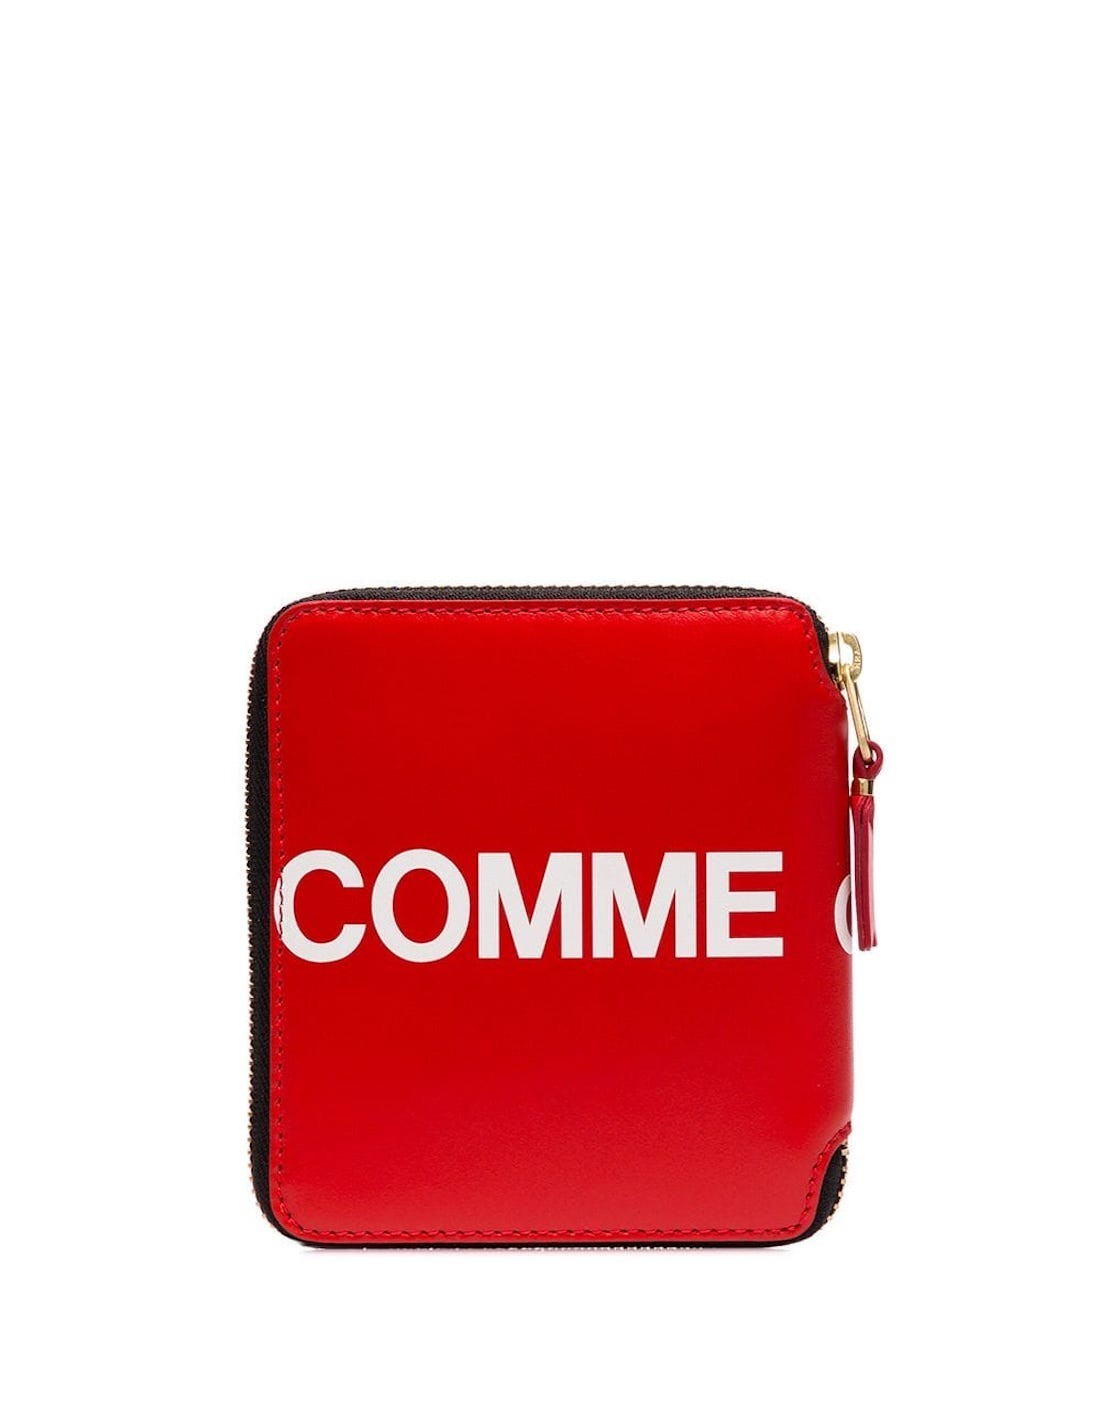 COMME DES GARCONS WALLET zipped red wallet with logo, unisex